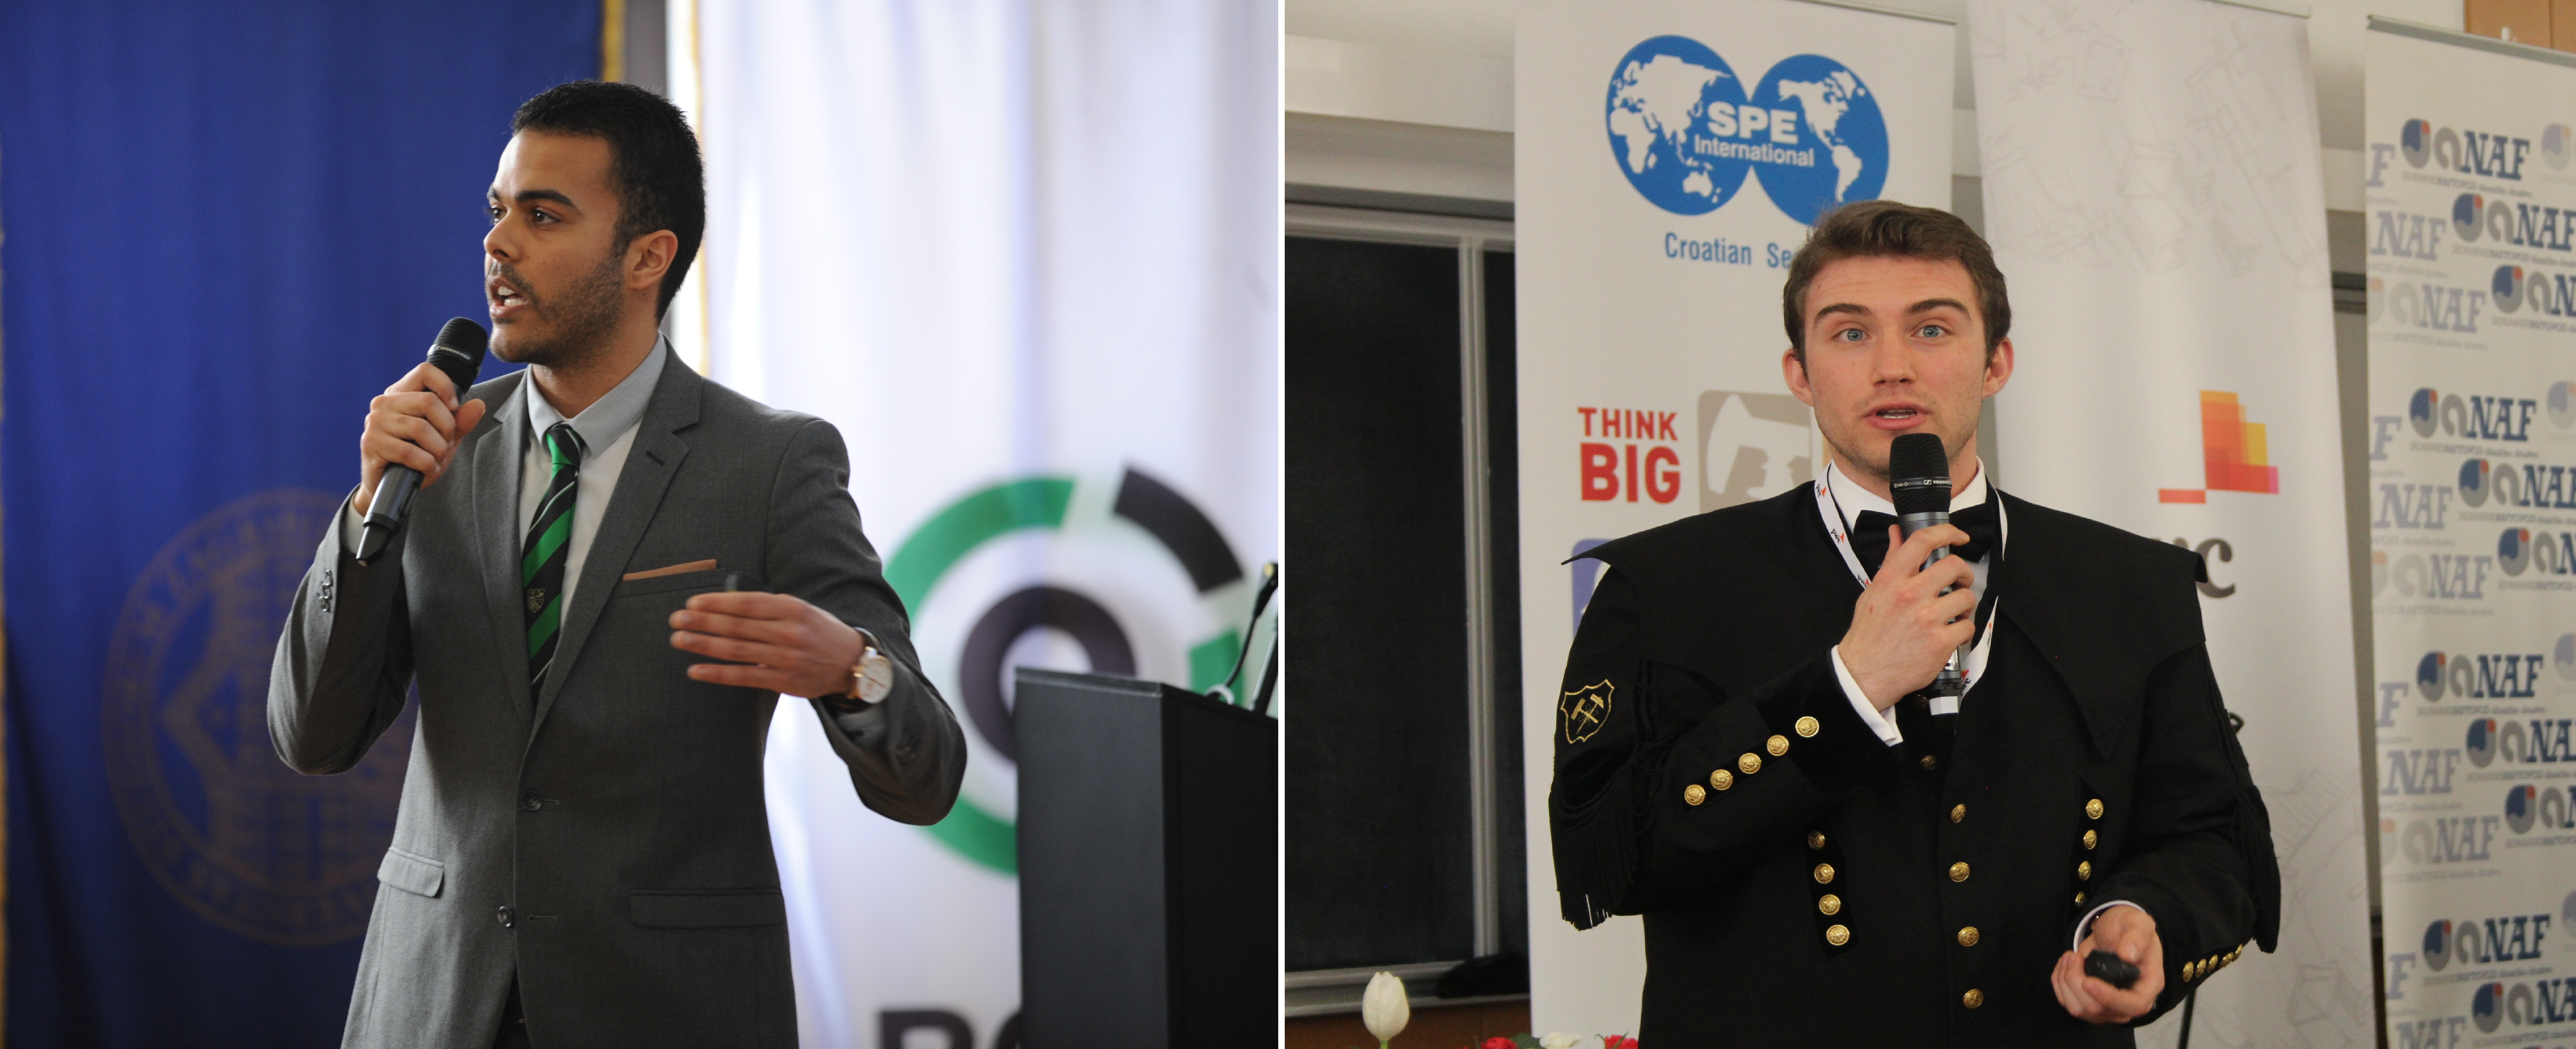 Representatives Mohamed Amine Ouarda and Florian Gamperl during their presentations